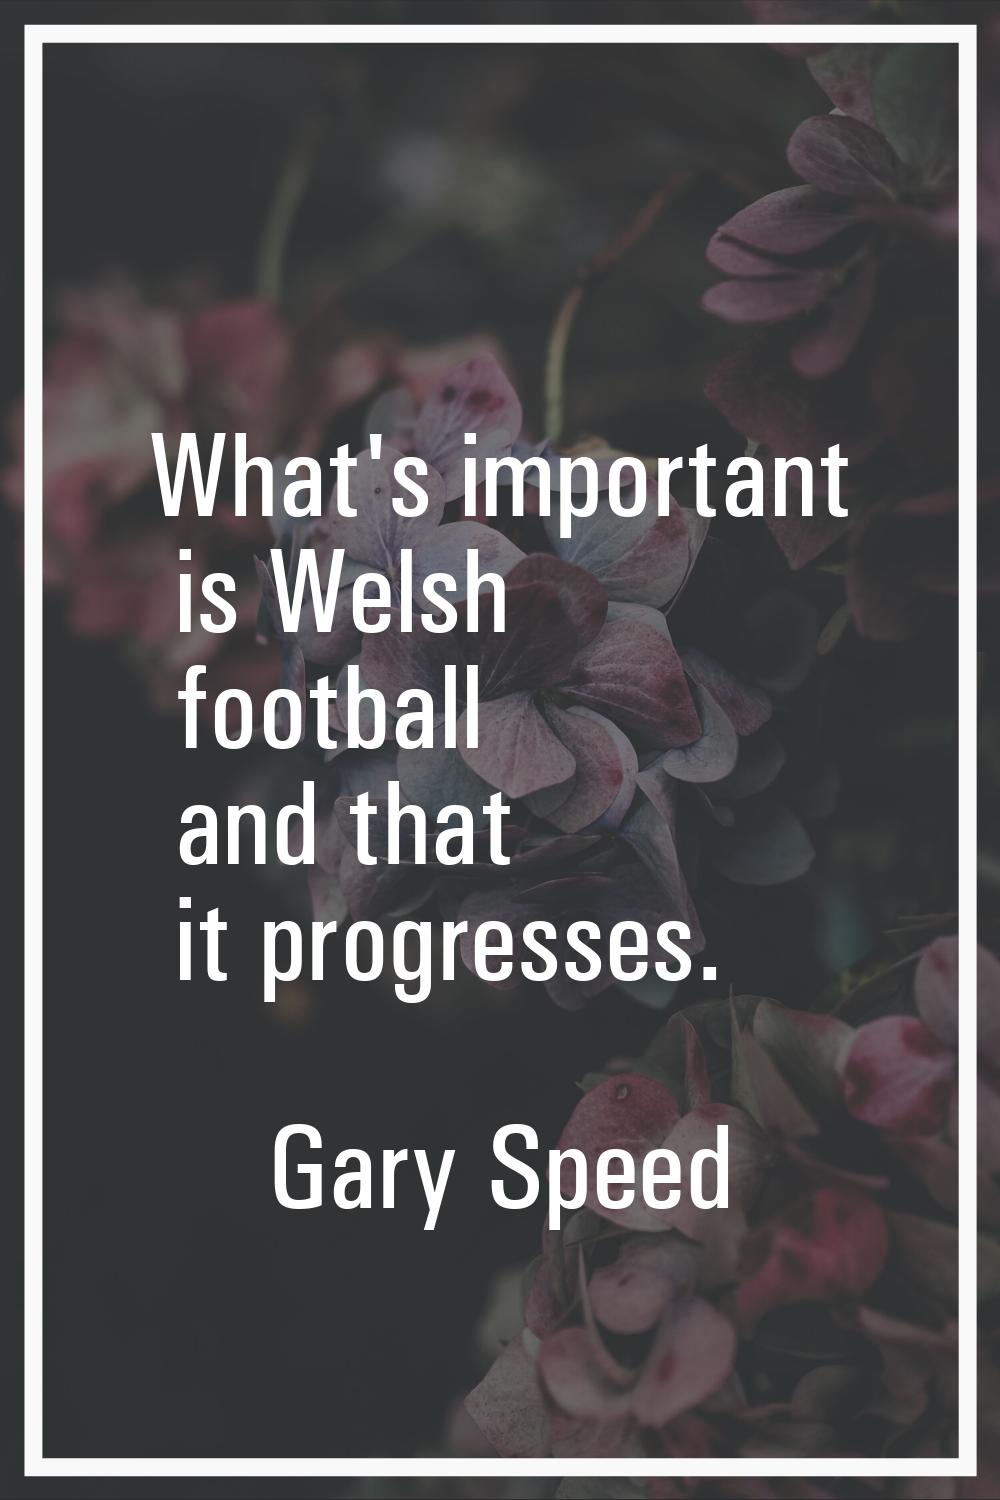 What's important is Welsh football and that it progresses.